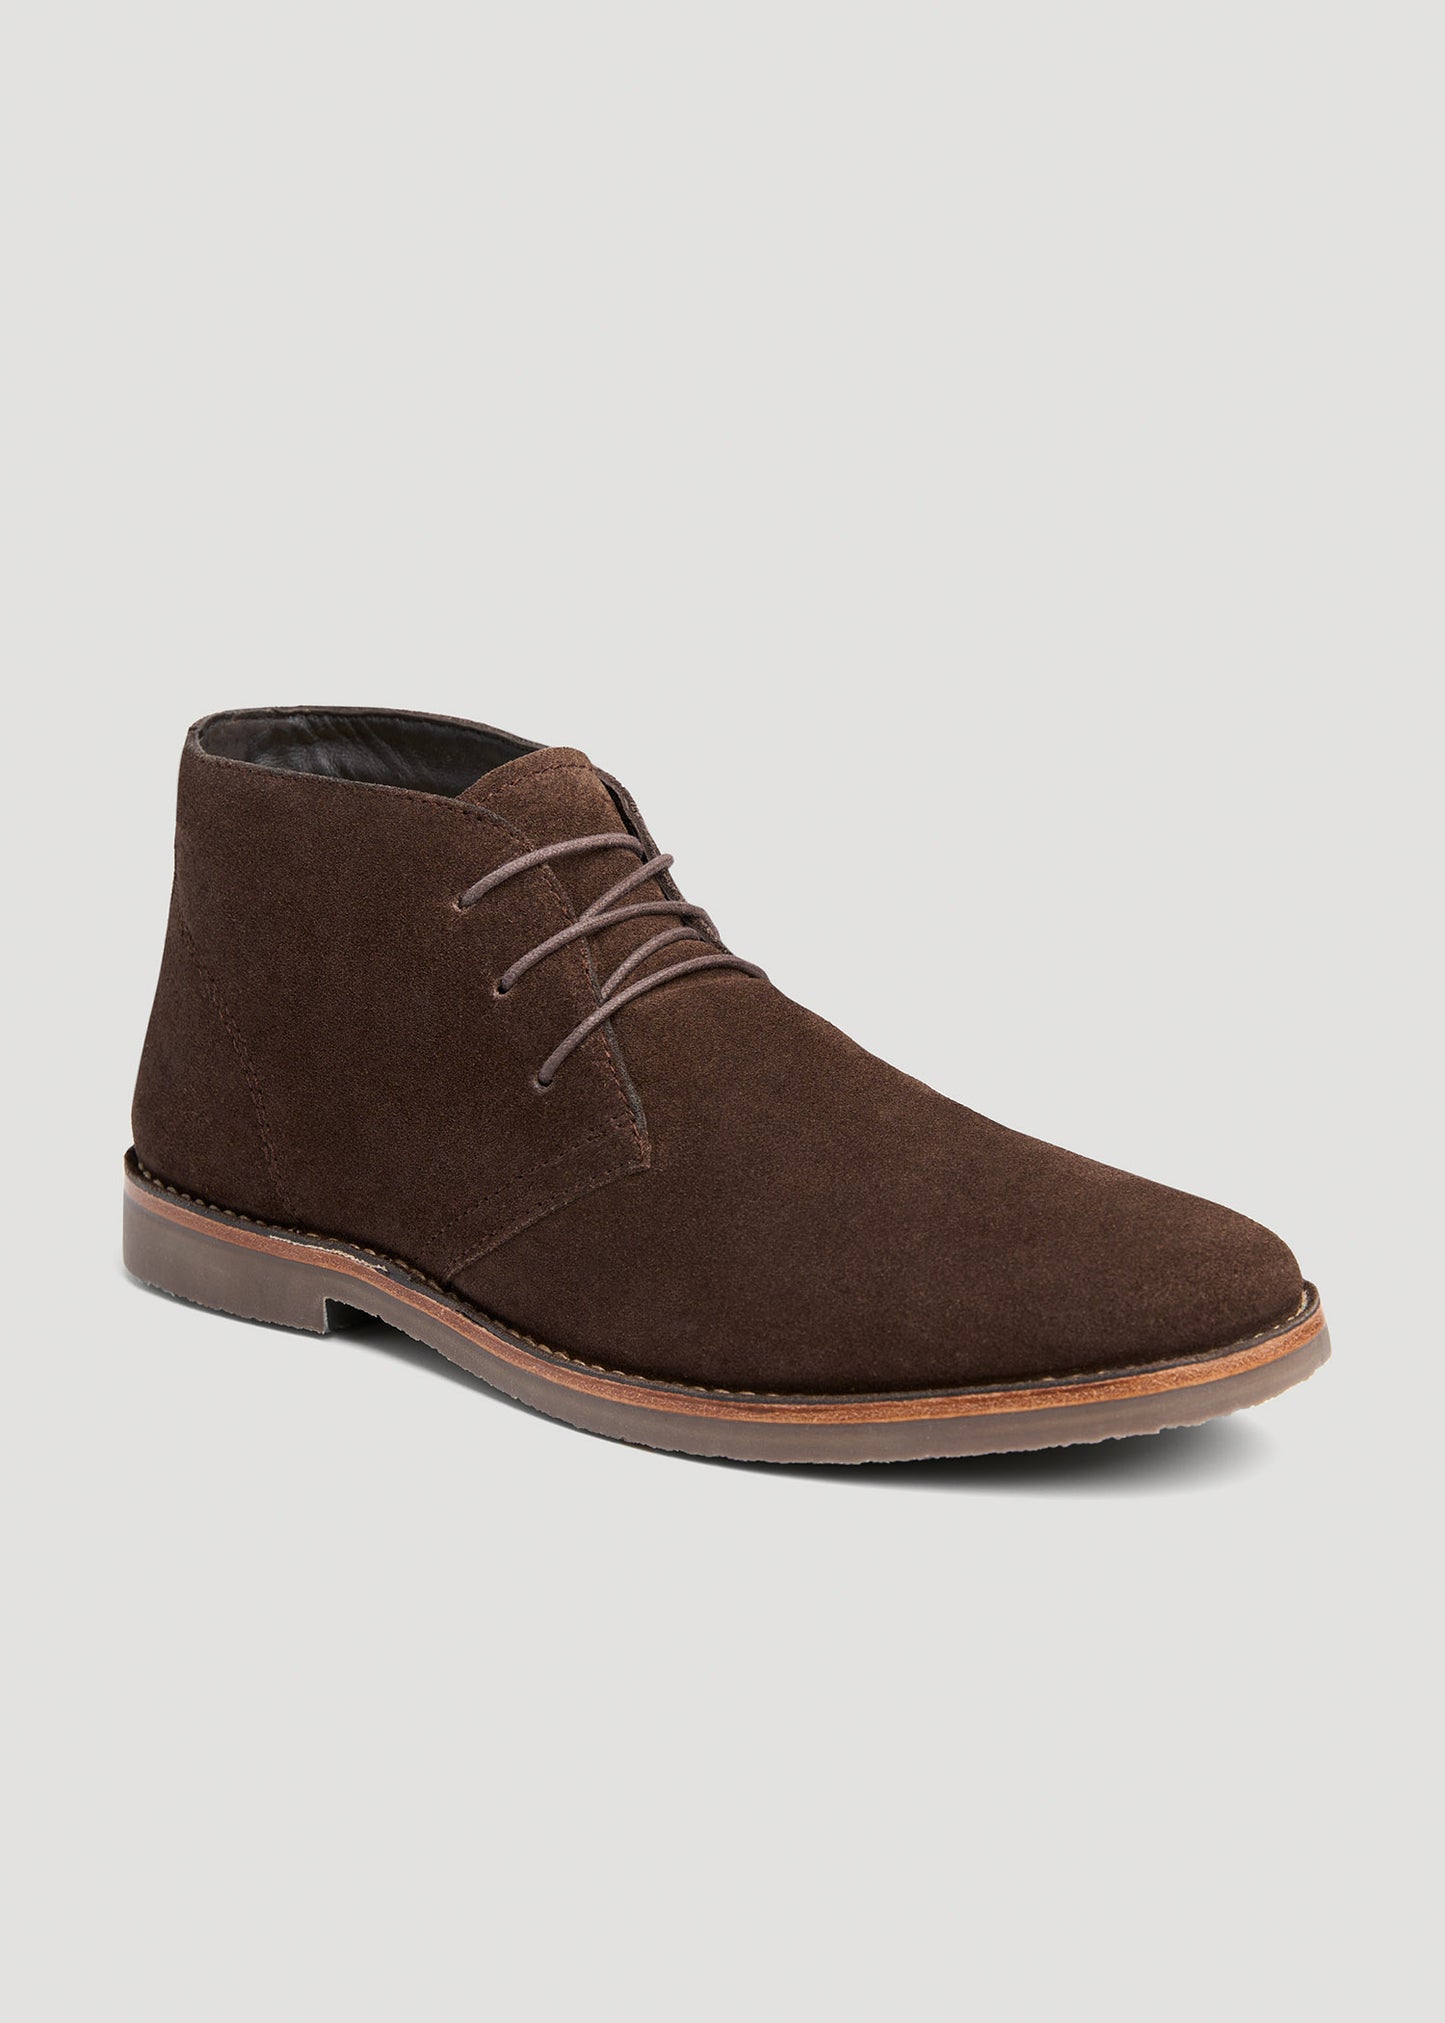 Side view of American Tall's Suede Desert Boot in the color Dark Brown.